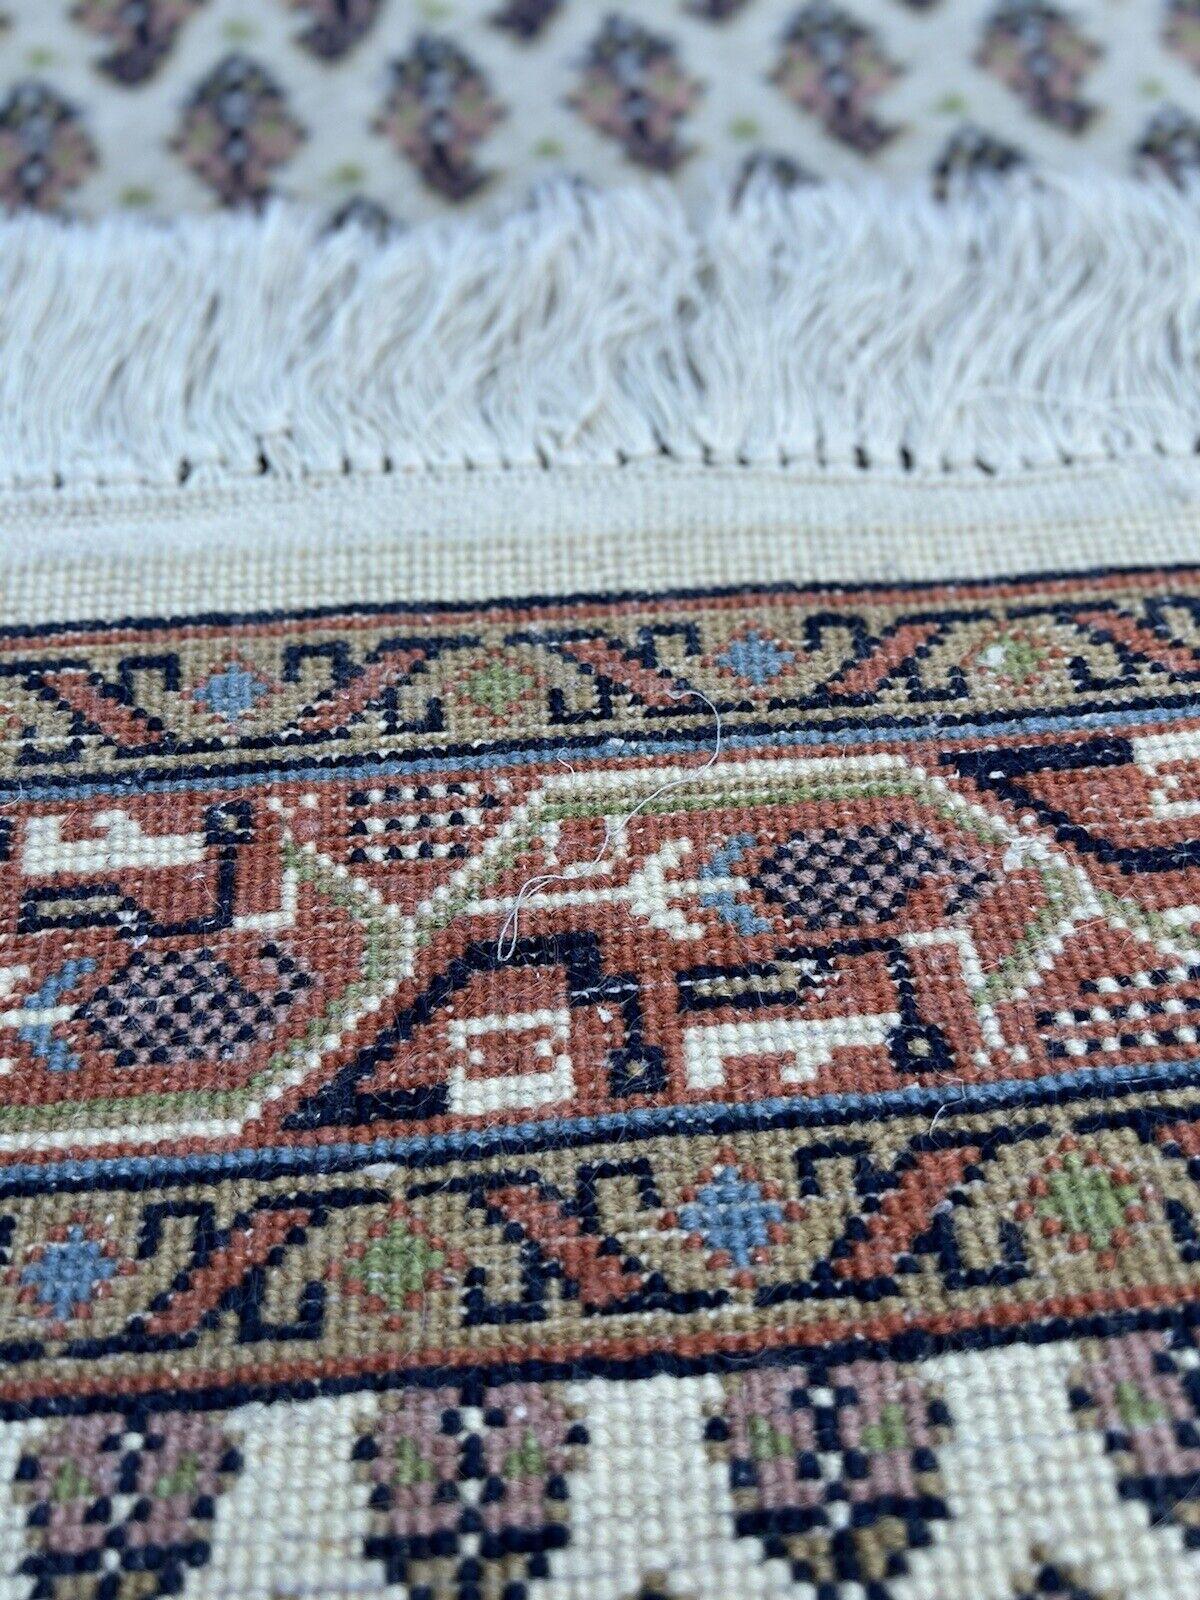 Discover the charm of traditional Indian craftsmanship with this Handmade Vintage Indian Seraband Rug. From the 1970s, this rug measures 2.3’ x 5’ (72cm x 155cm) and is a delightful addition to any space.

The rug is in good condition, reflecting